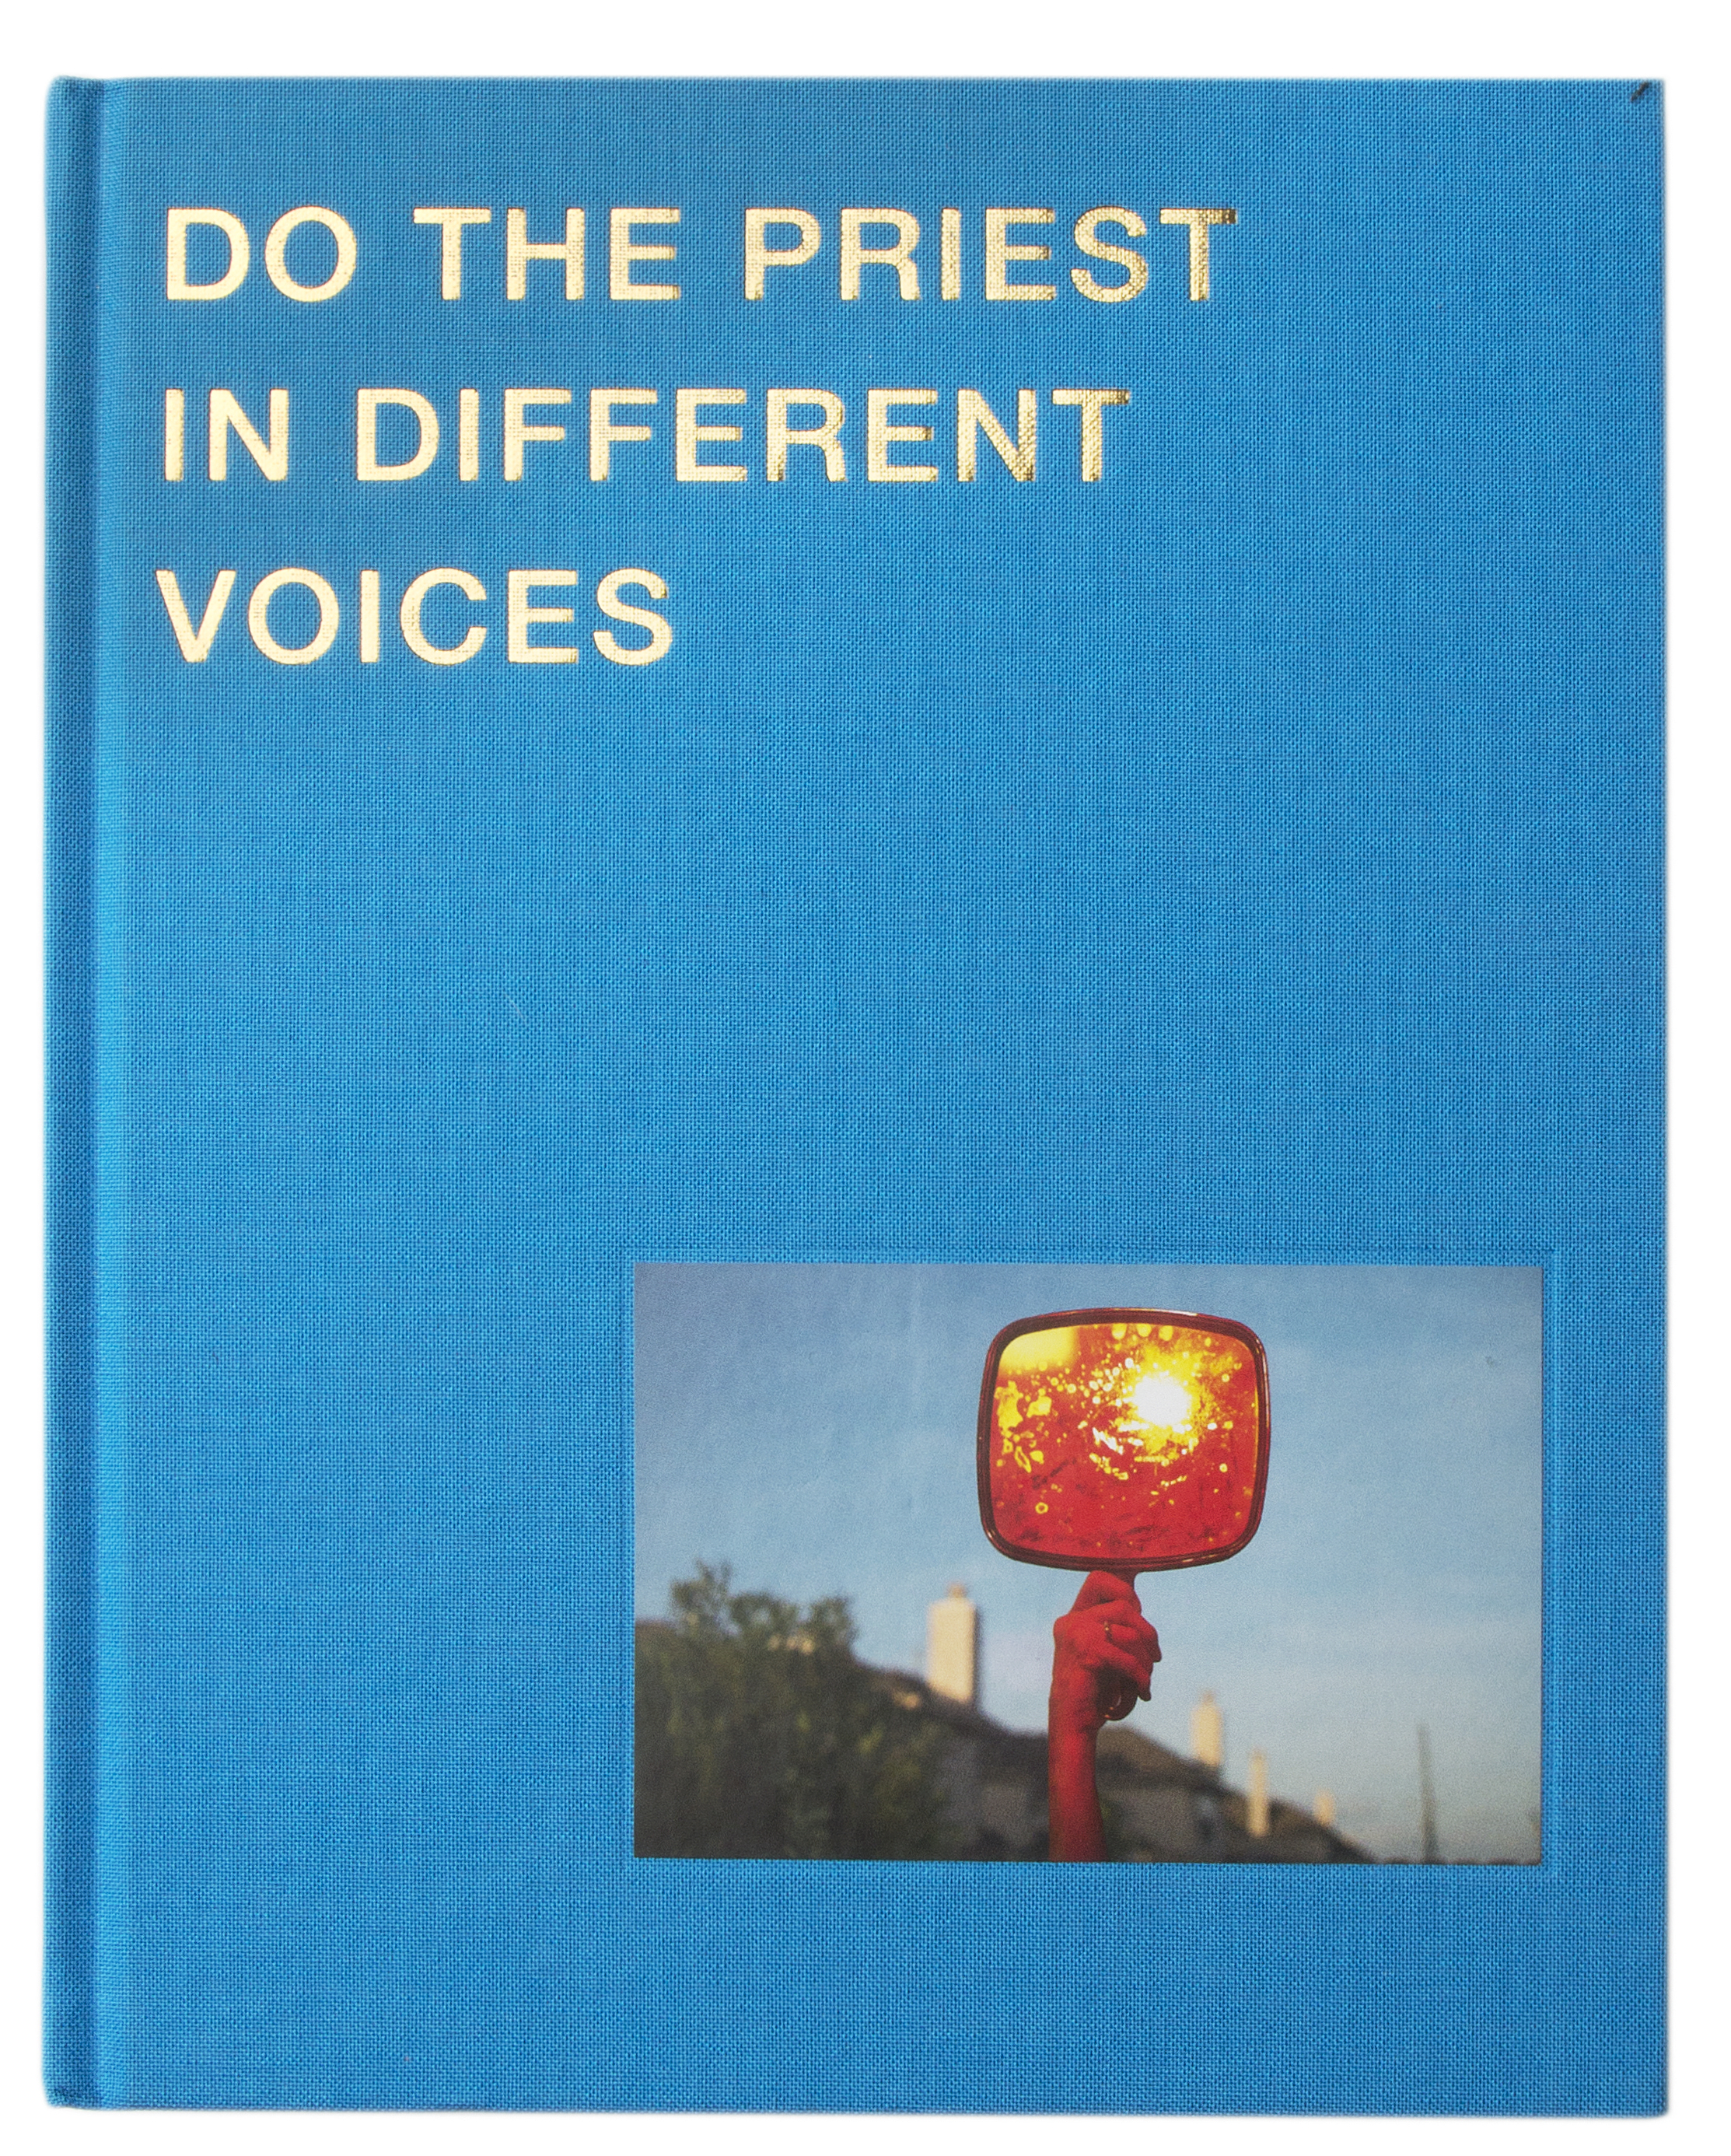 Do the Priest in Different Voices